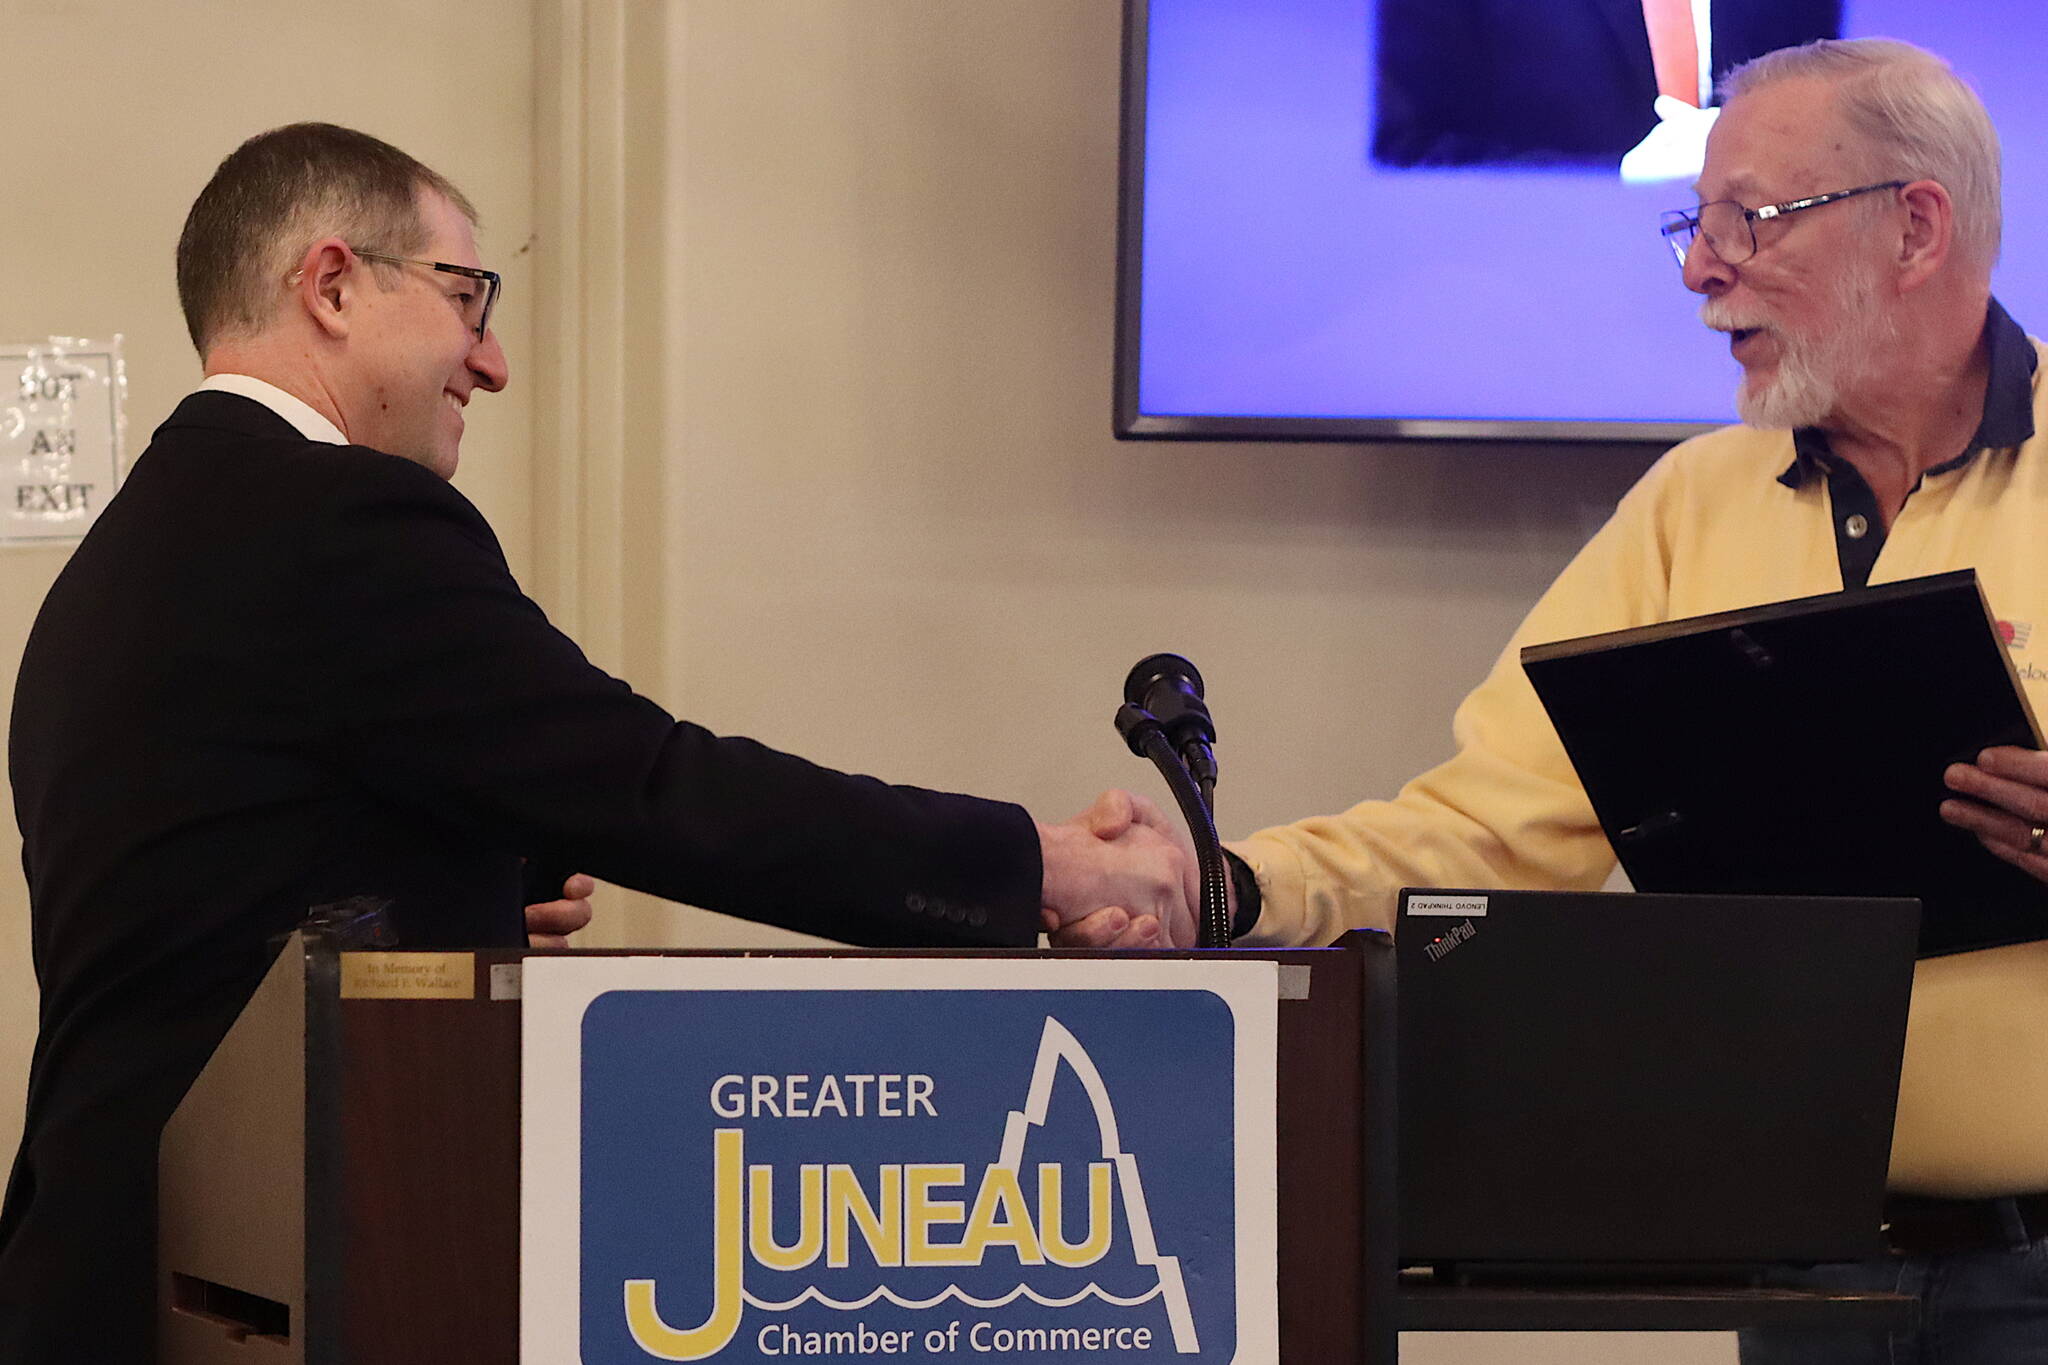 Juneau State Sen. Jesse Kiehl, left, gives a legislative proclamation to former longtime Juneau Assembly member Loren Jones, who stepped down last year due to term limits, following Kiehl’s speech at the Juneau Chamber of Commerce’s weekly luncheon Thursday at the Juneau Moose Family Center. (Mark Sabbatini / Juneau Empire)